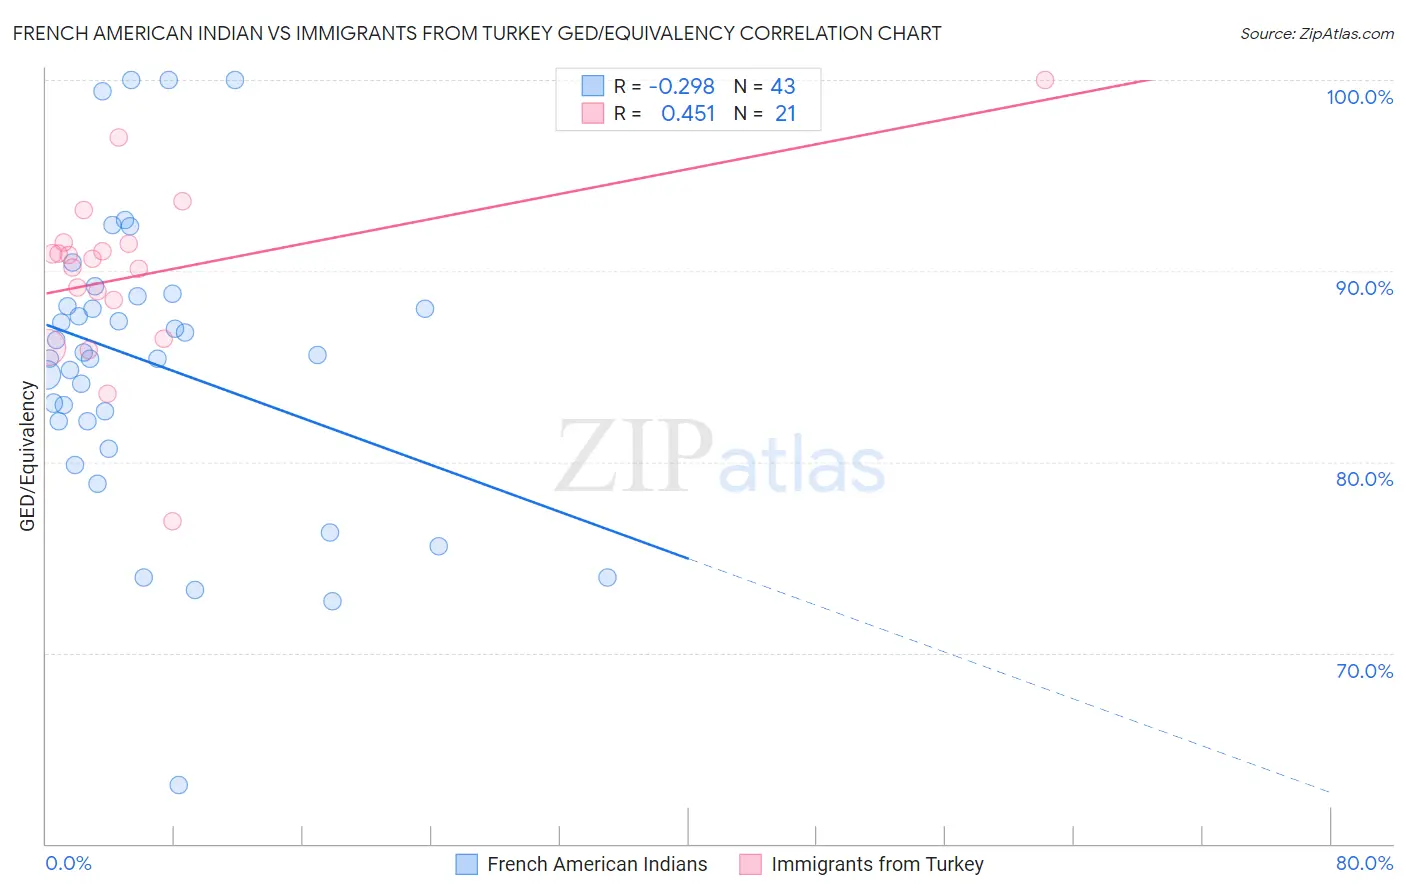 French American Indian vs Immigrants from Turkey GED/Equivalency